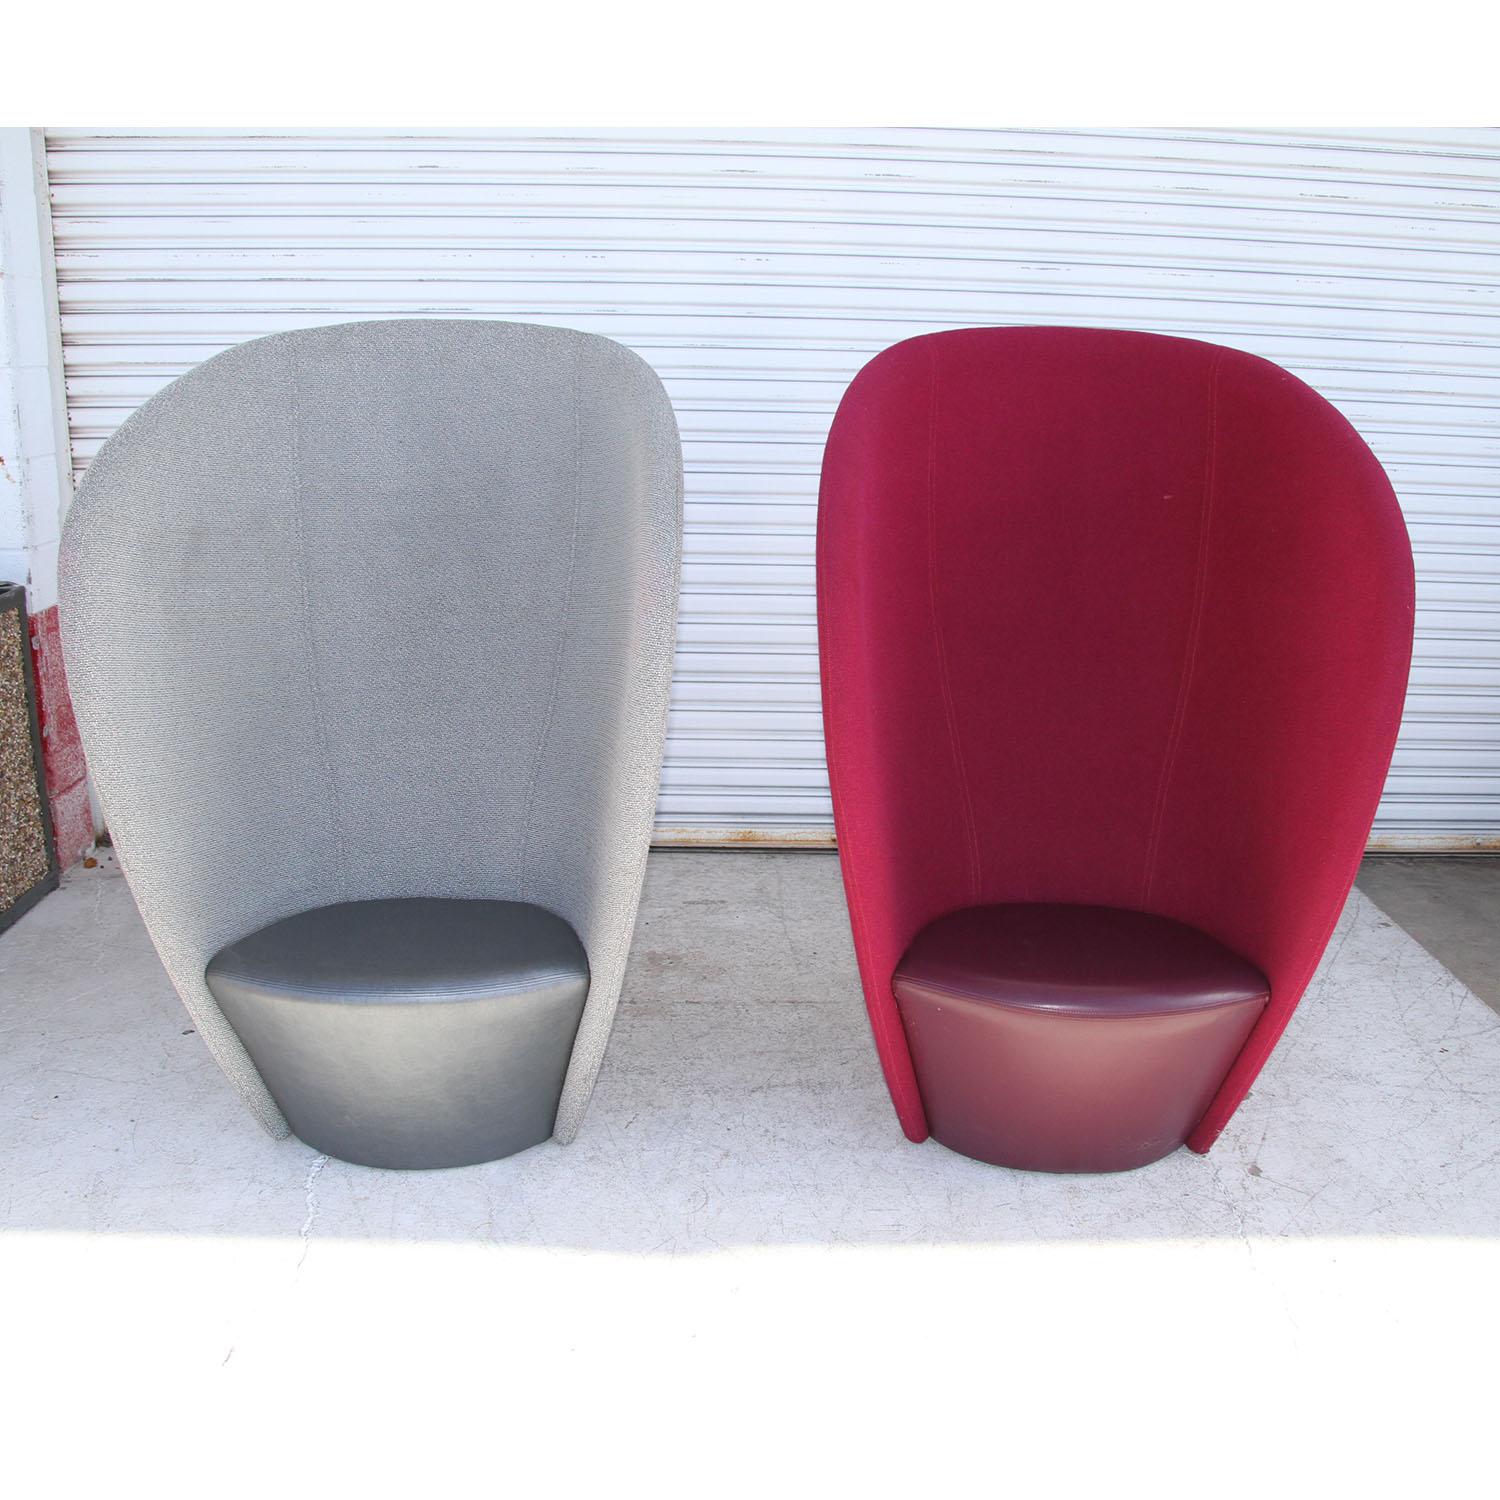 1 Hightower Shelter Lounge Chair In Good Condition For Sale In Pasadena, TX